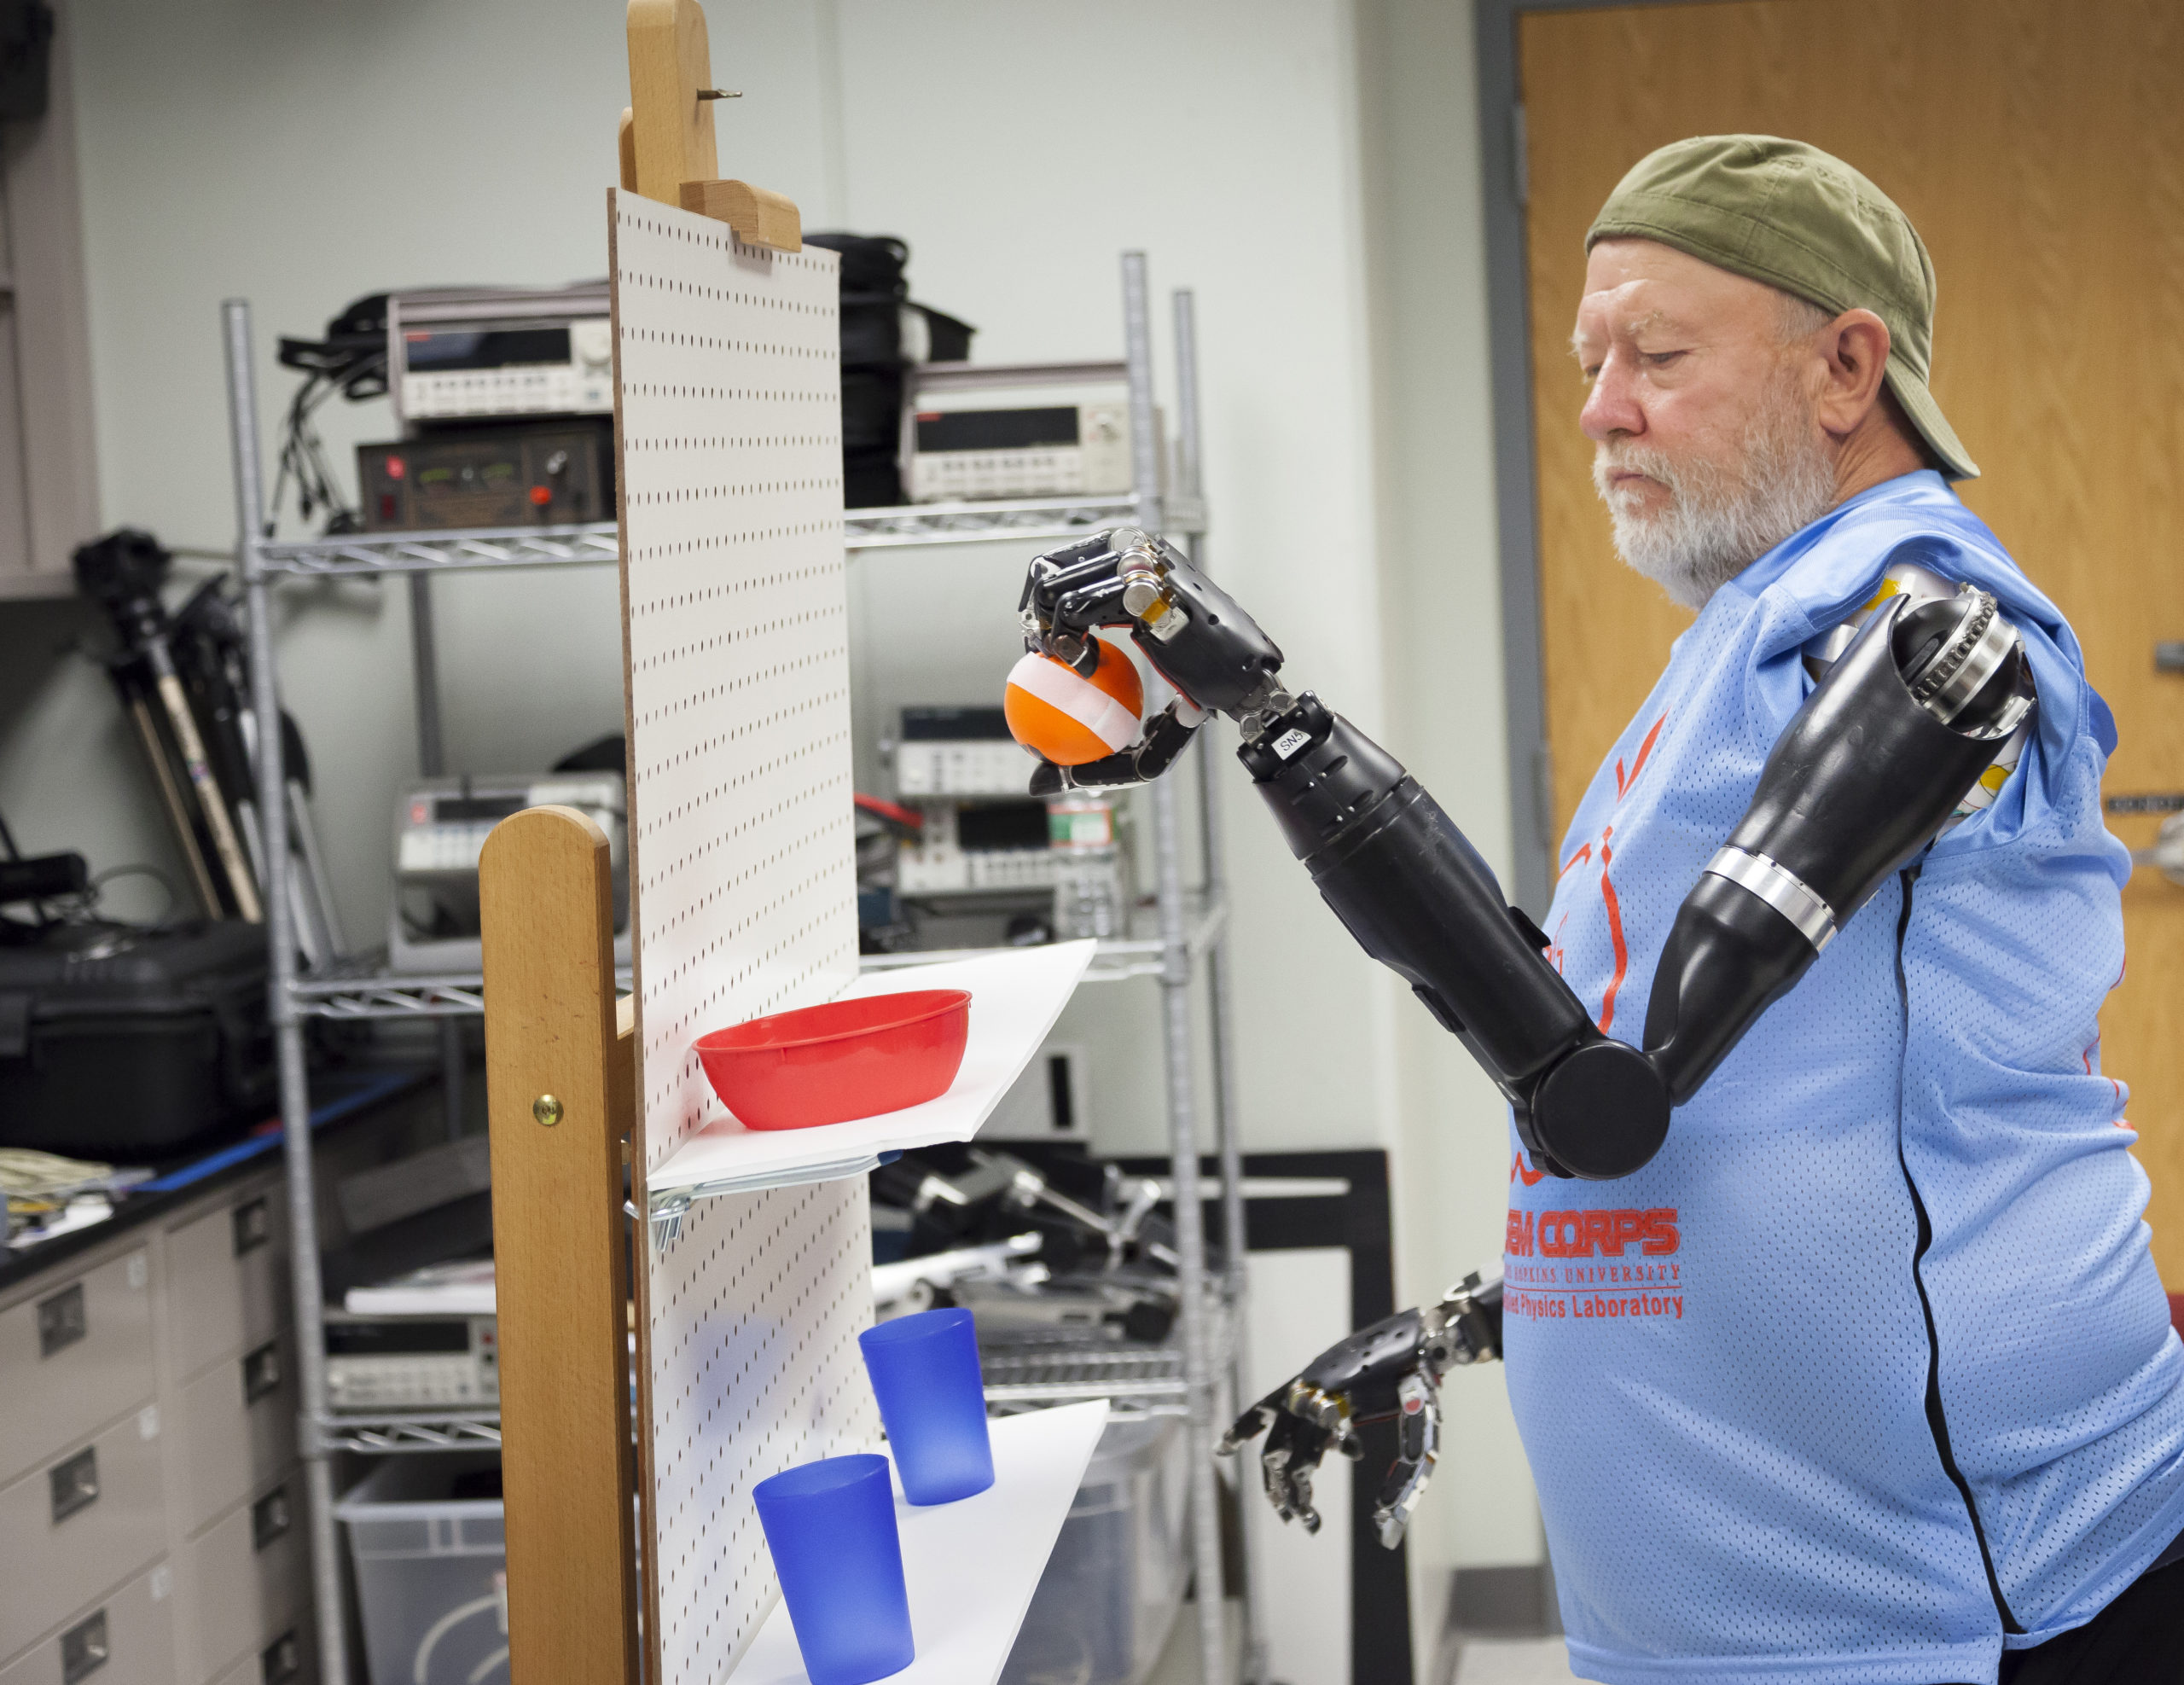 Double Amputee Controls DARPA Robotic Prosthetic Arms With His Mind